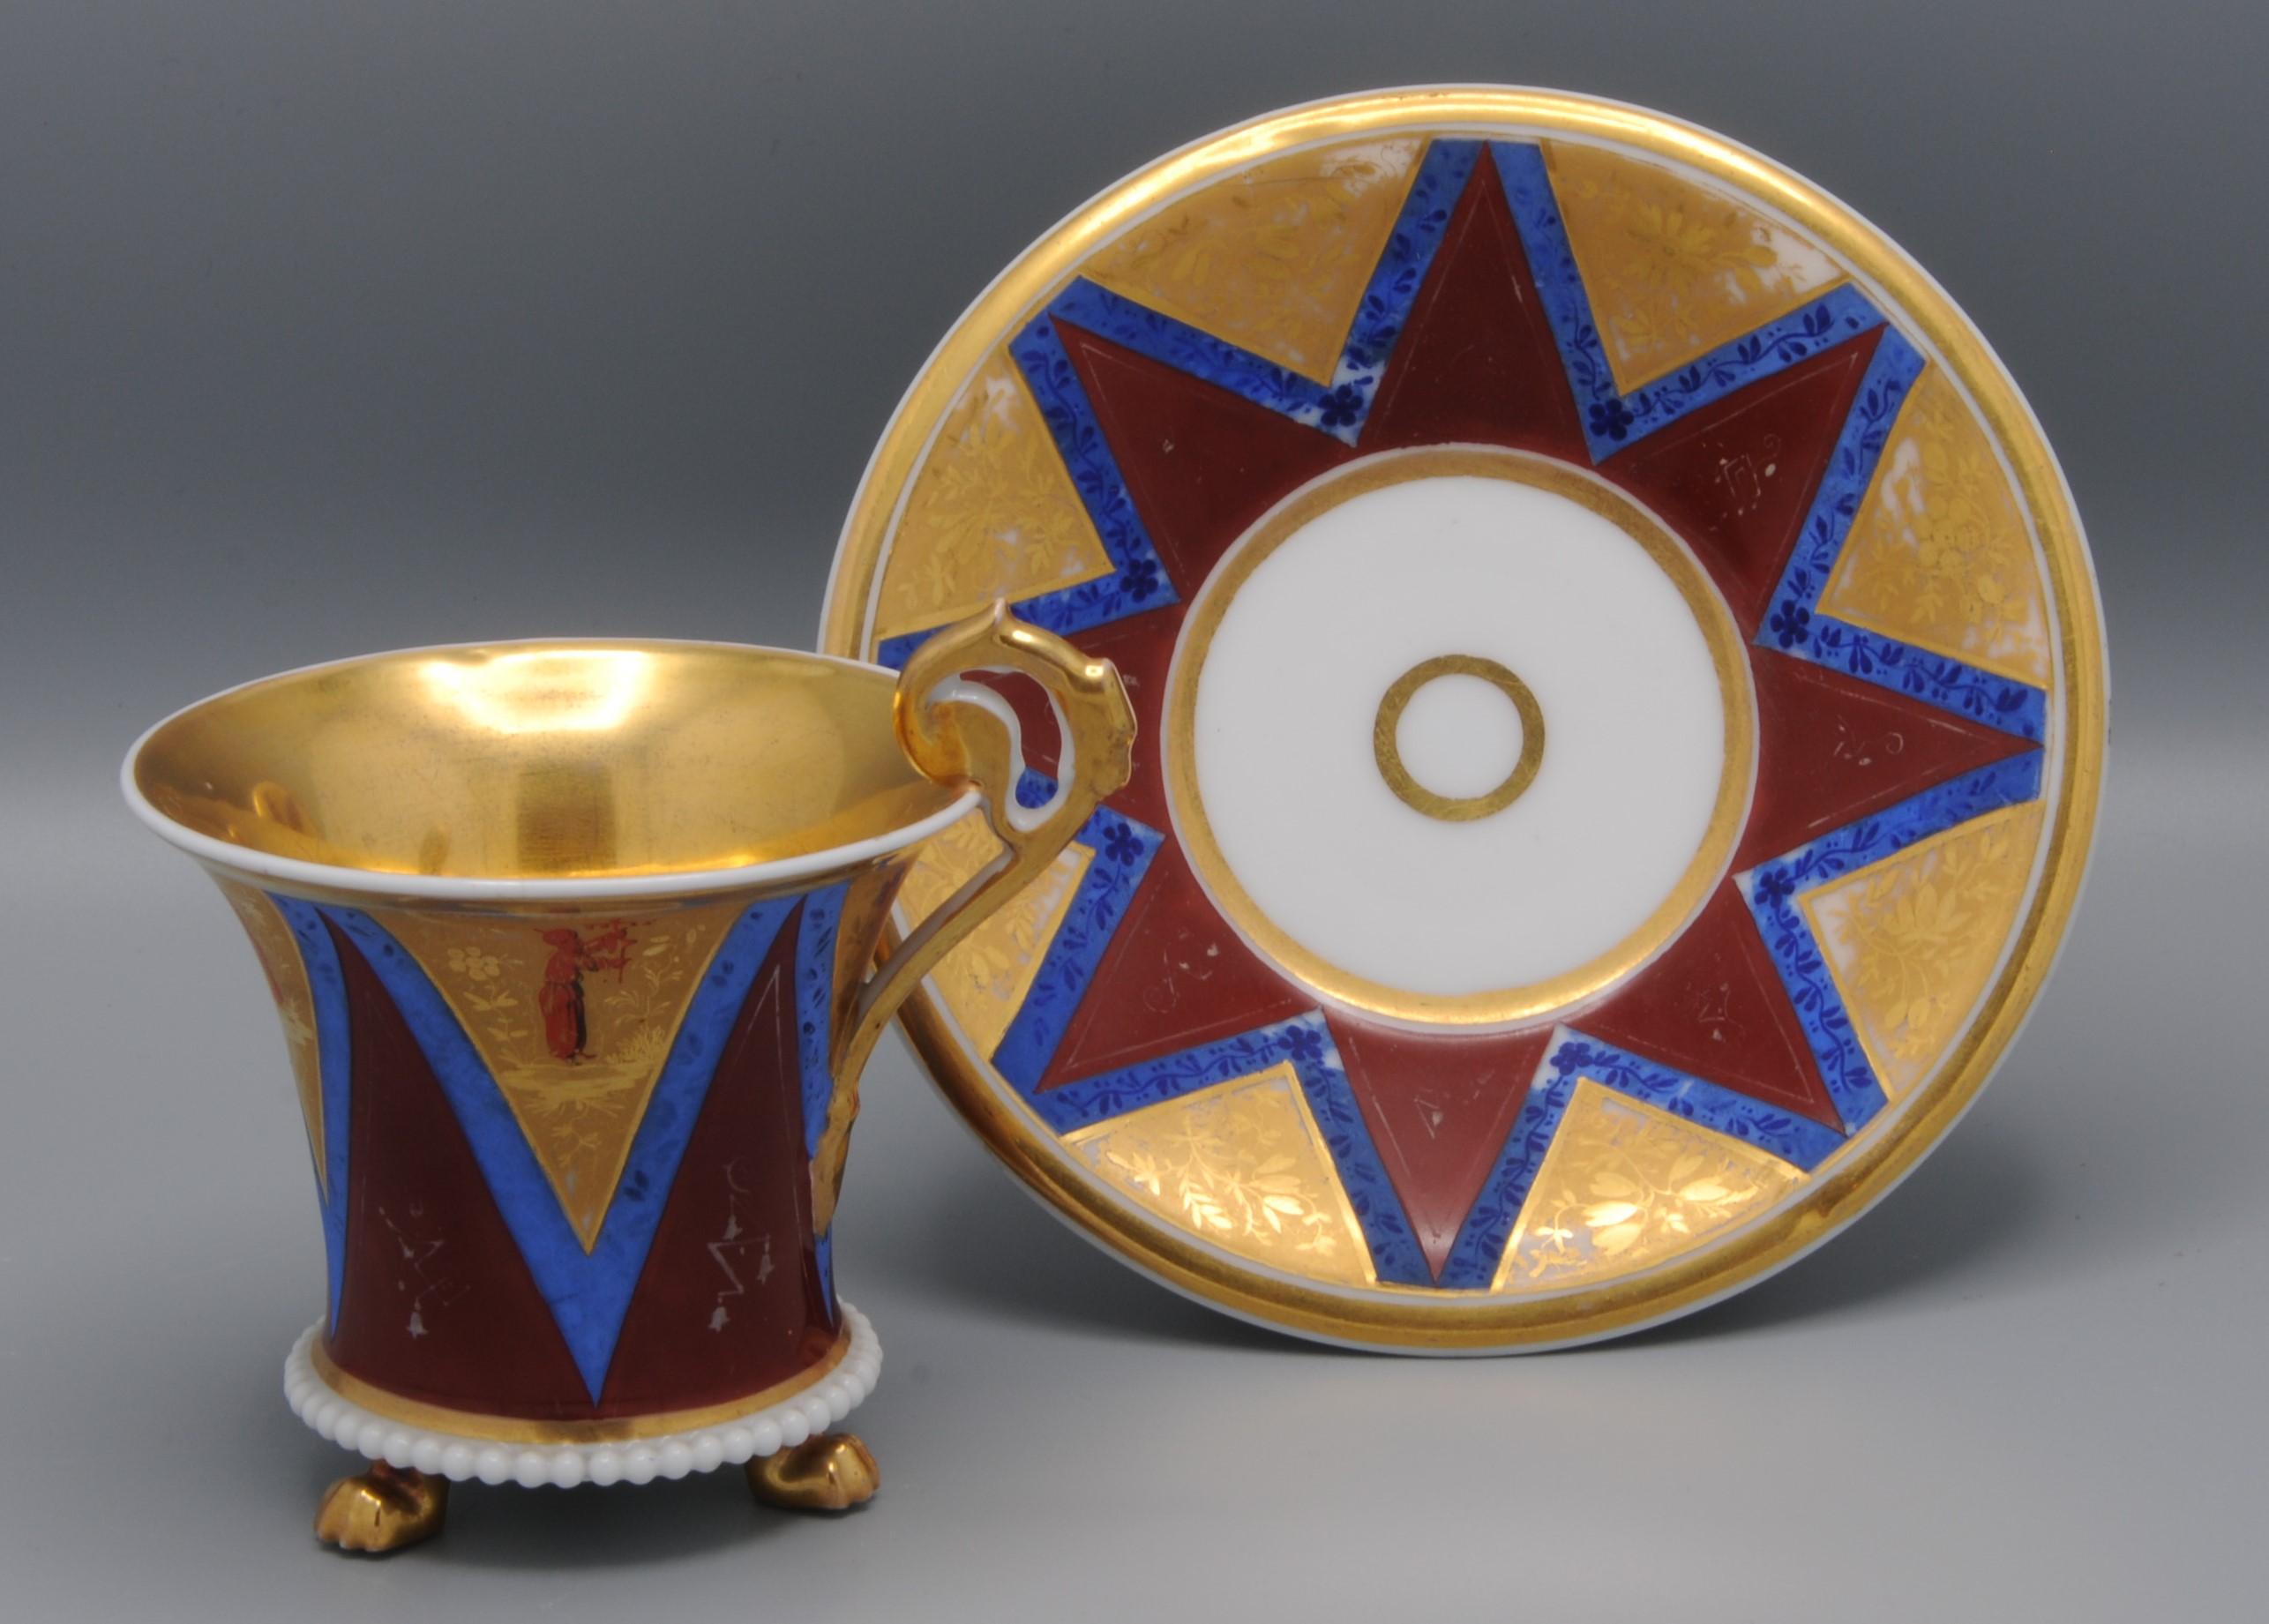 Marvelous cup and saucer, elaborately decorated with geometrical forms in red, blue and gold. Beautifully worked gilding, little details of Chinese figures and Chinese characters.  
Possibly made Darte Frères factory, Paris, ca. 1815
No marking, but